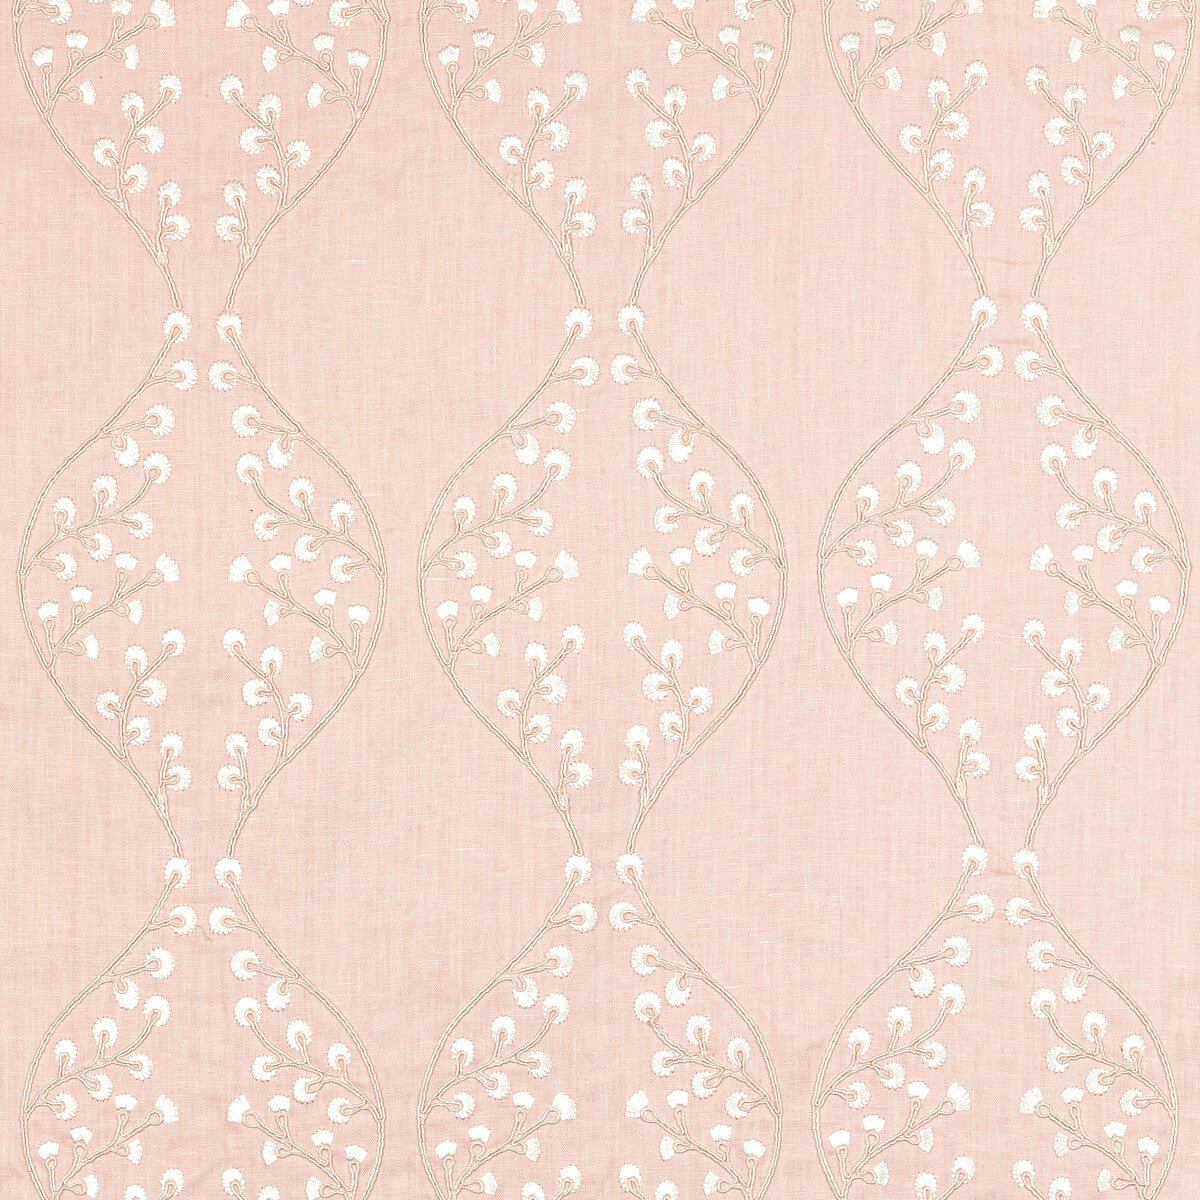 Lillie Embroidery fabric in petal color - pattern 2021129.17.0 - by Lee Jofa in the Summerland collection